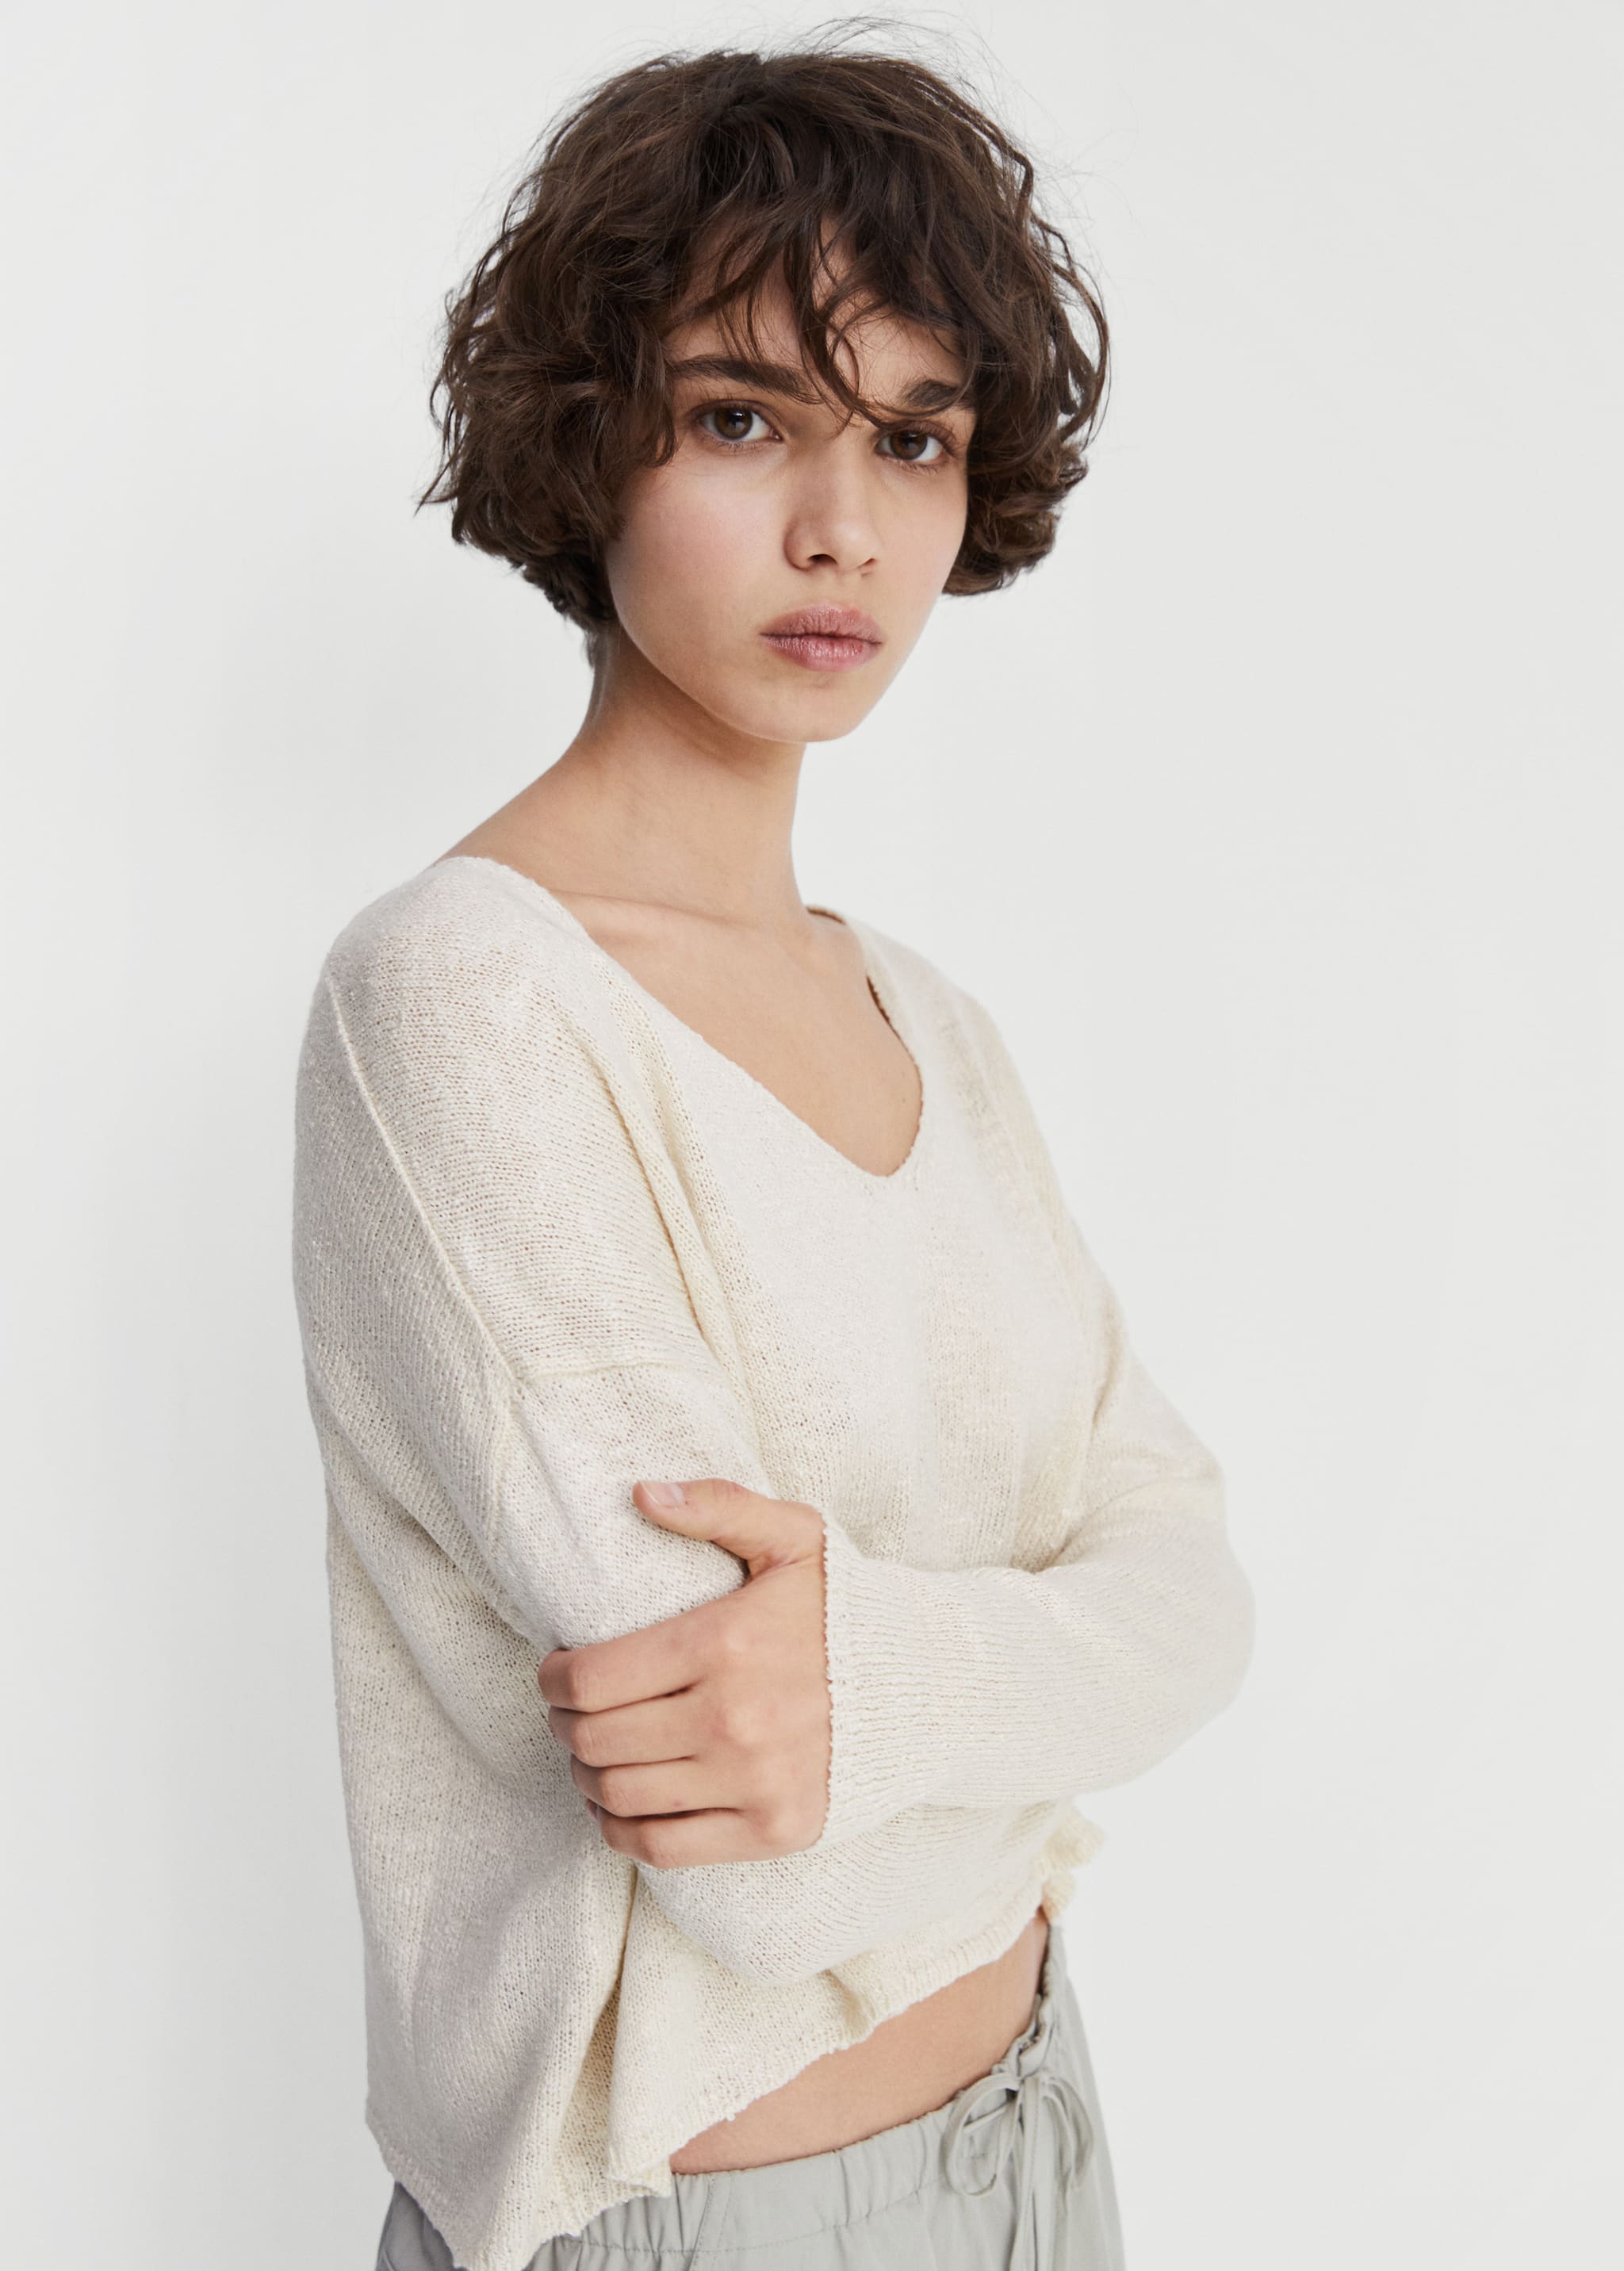 Low-cut neck sweater - Details of the article 1